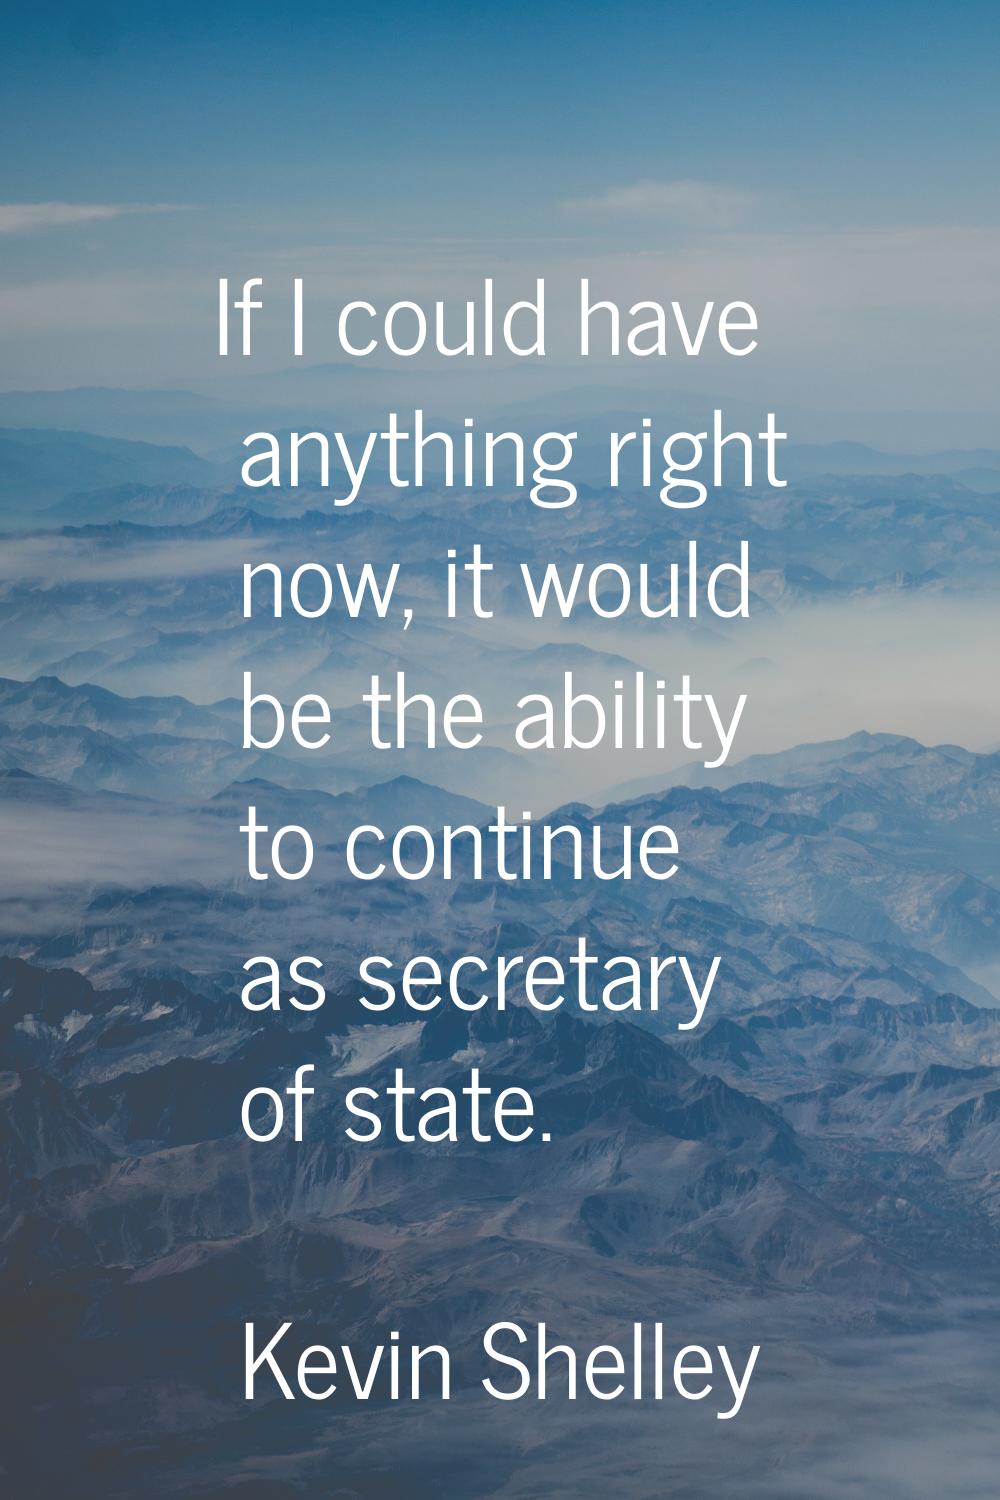 If I could have anything right now, it would be the ability to continue as secretary of state.